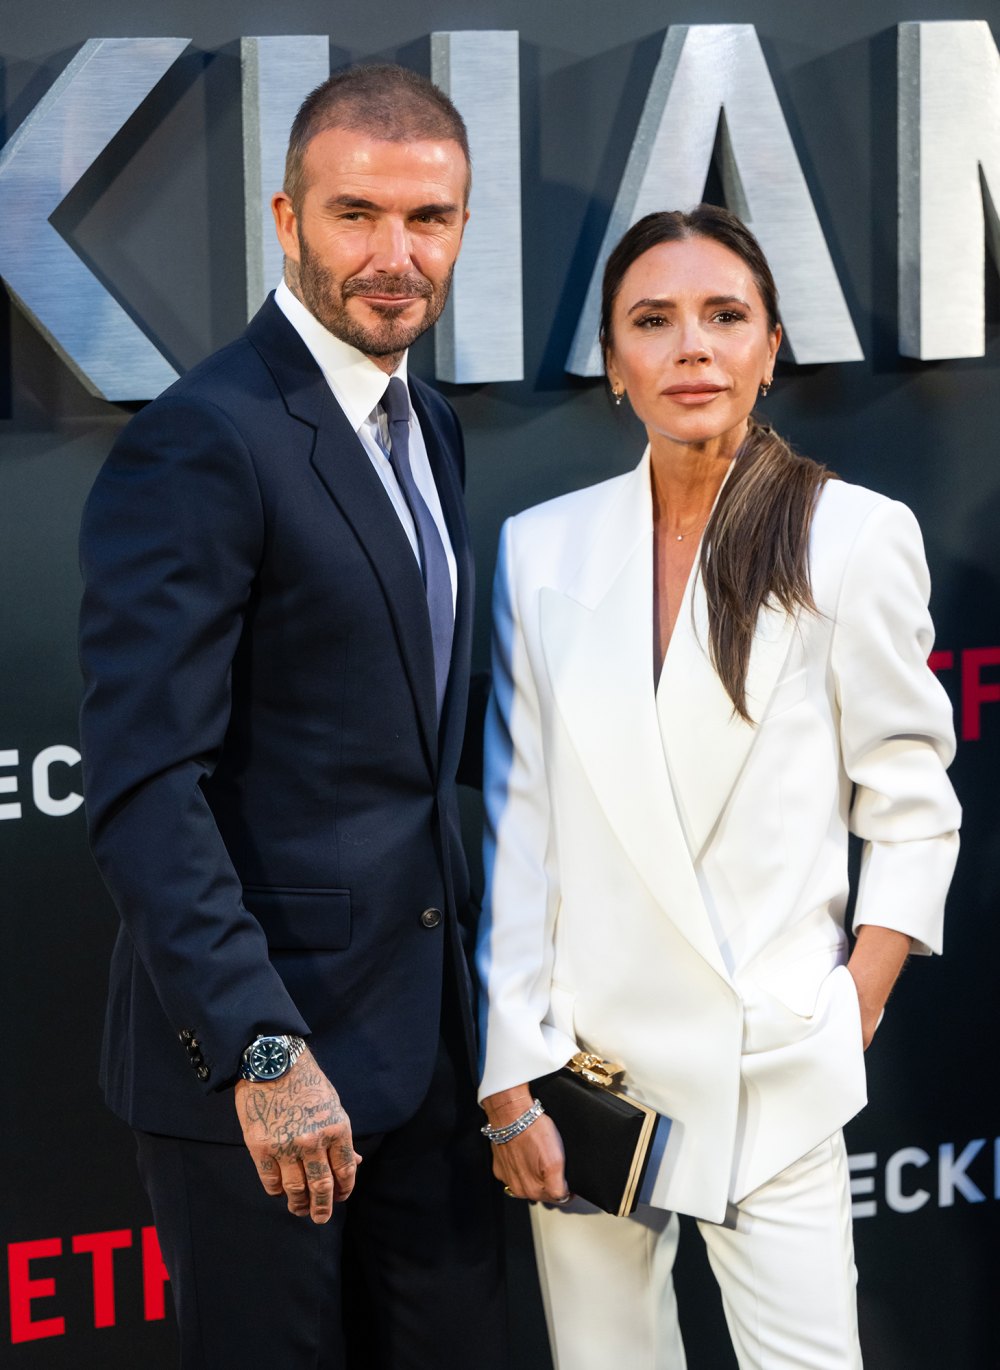 Victoria Beckham Was Told Her Marriage to David Beckham 'Wouldn't Last